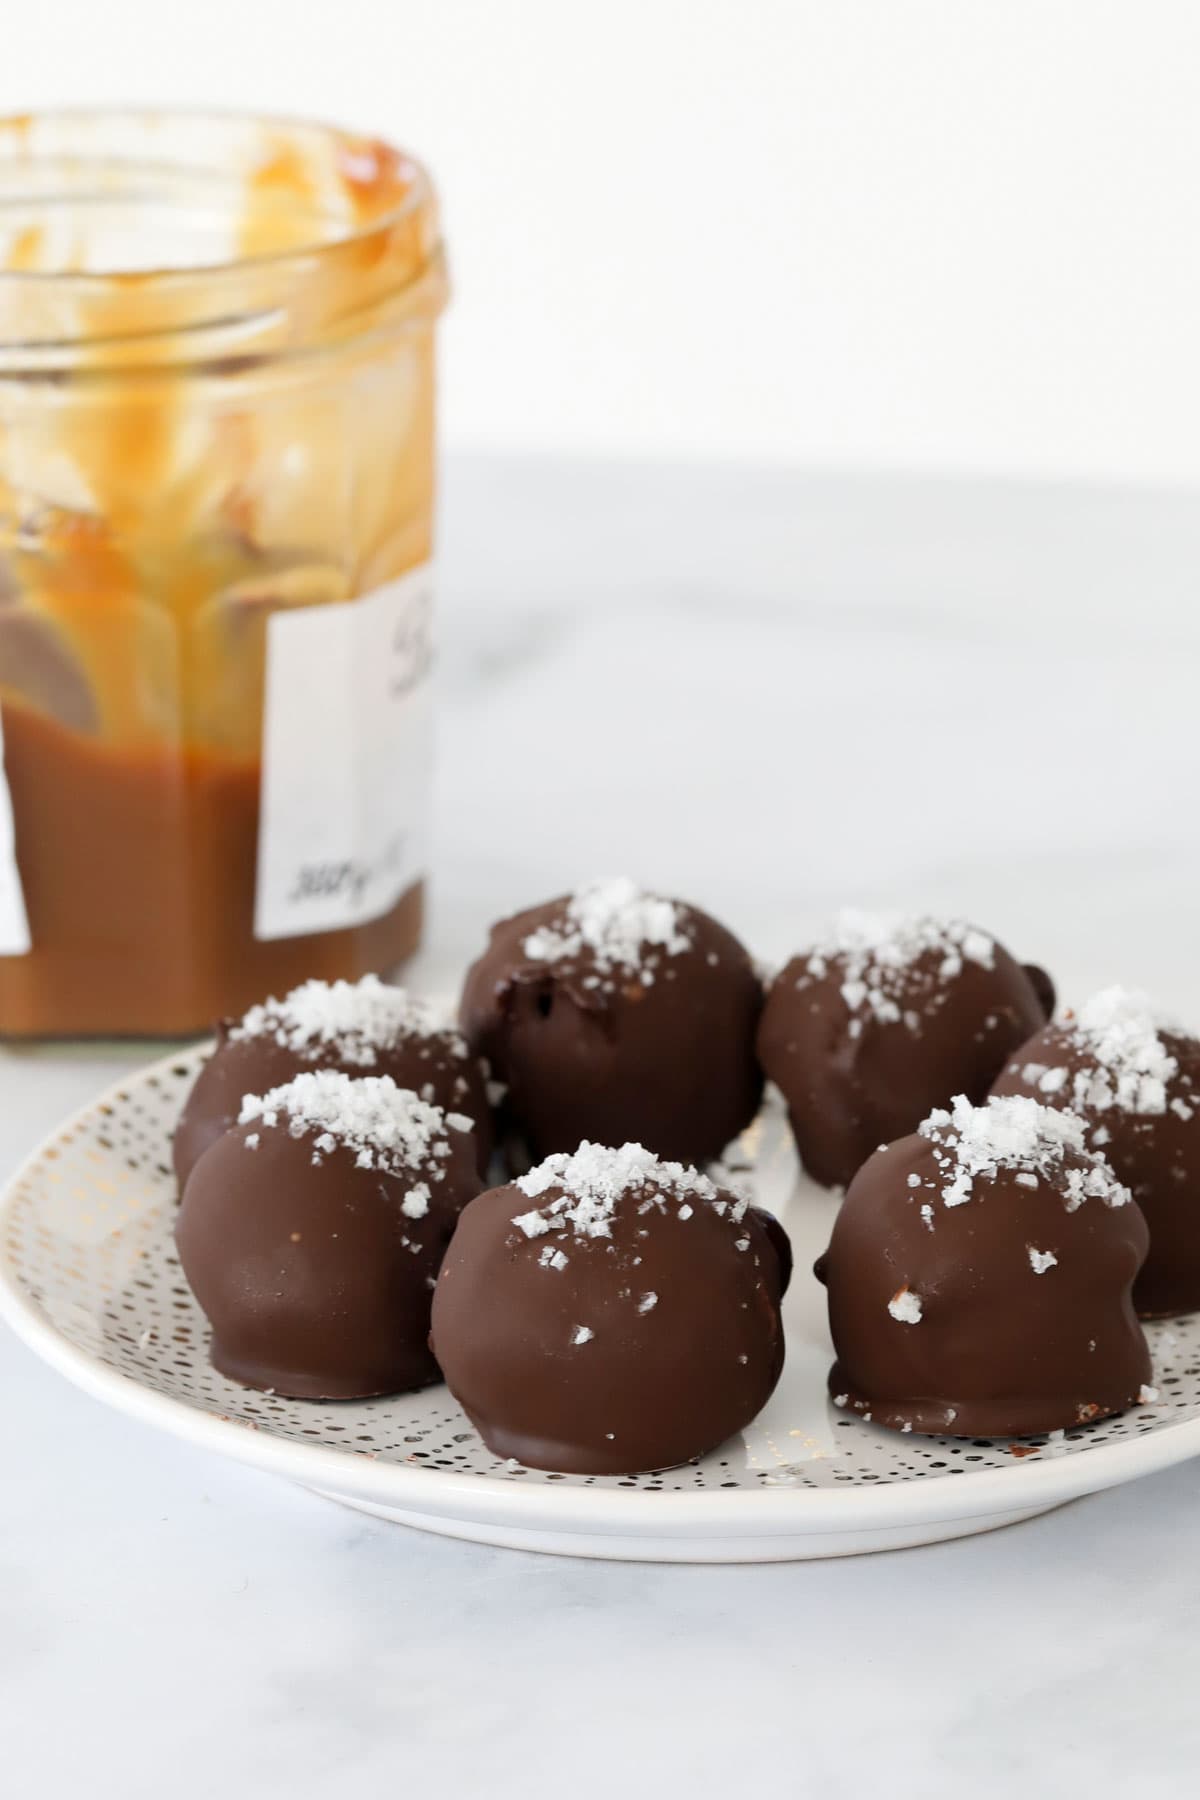 Side view of caramel truffles on a plate with a jar of caramel behind.